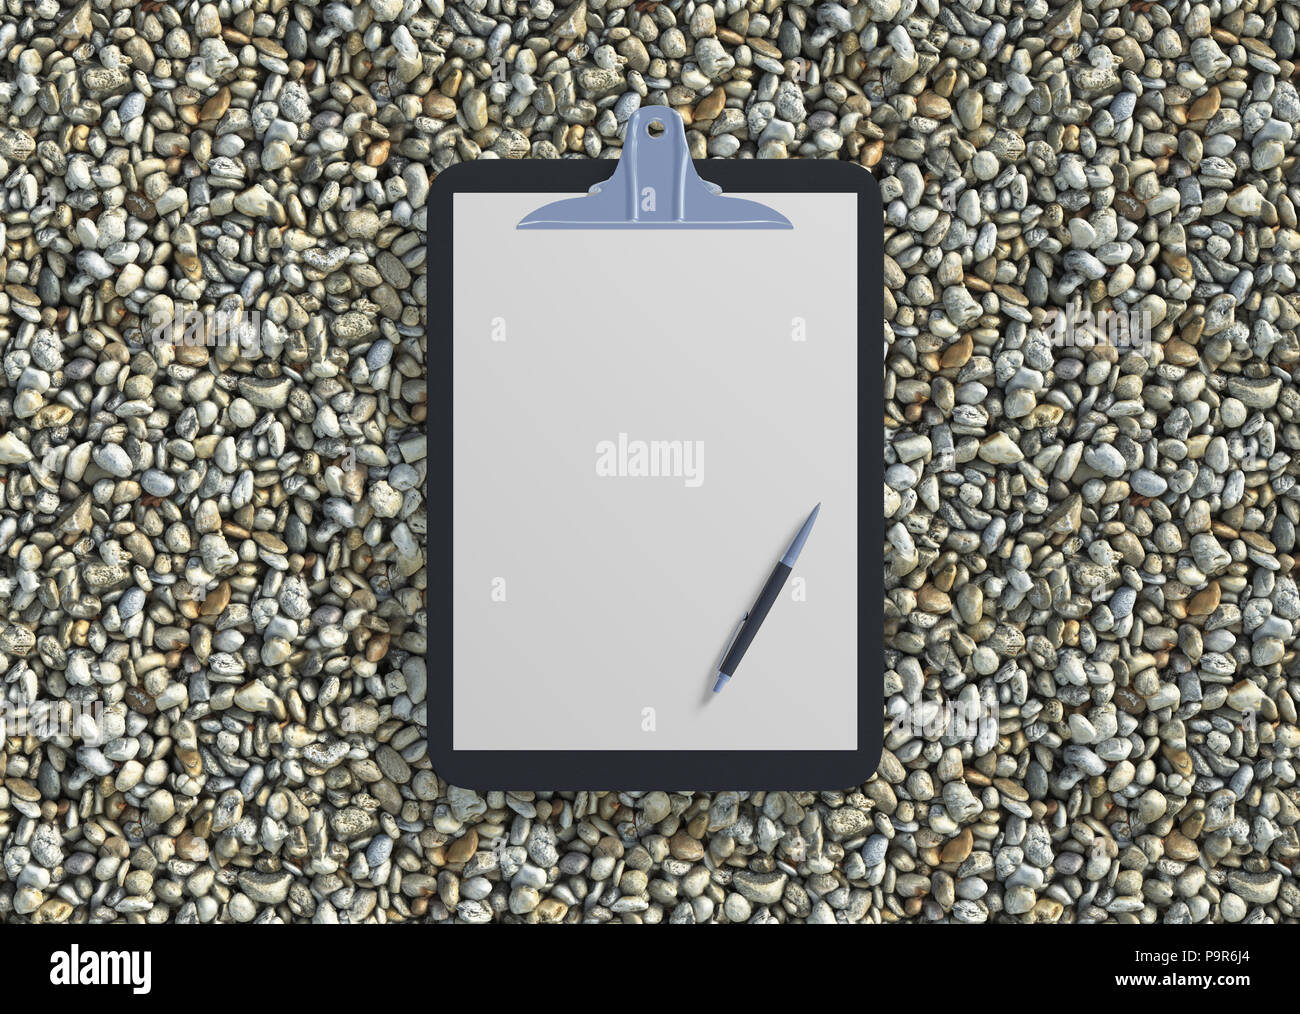 Blank clipboard with ballpen on gravel isolated with clipping path around sheet of paper. 3d illustration Stock Photo